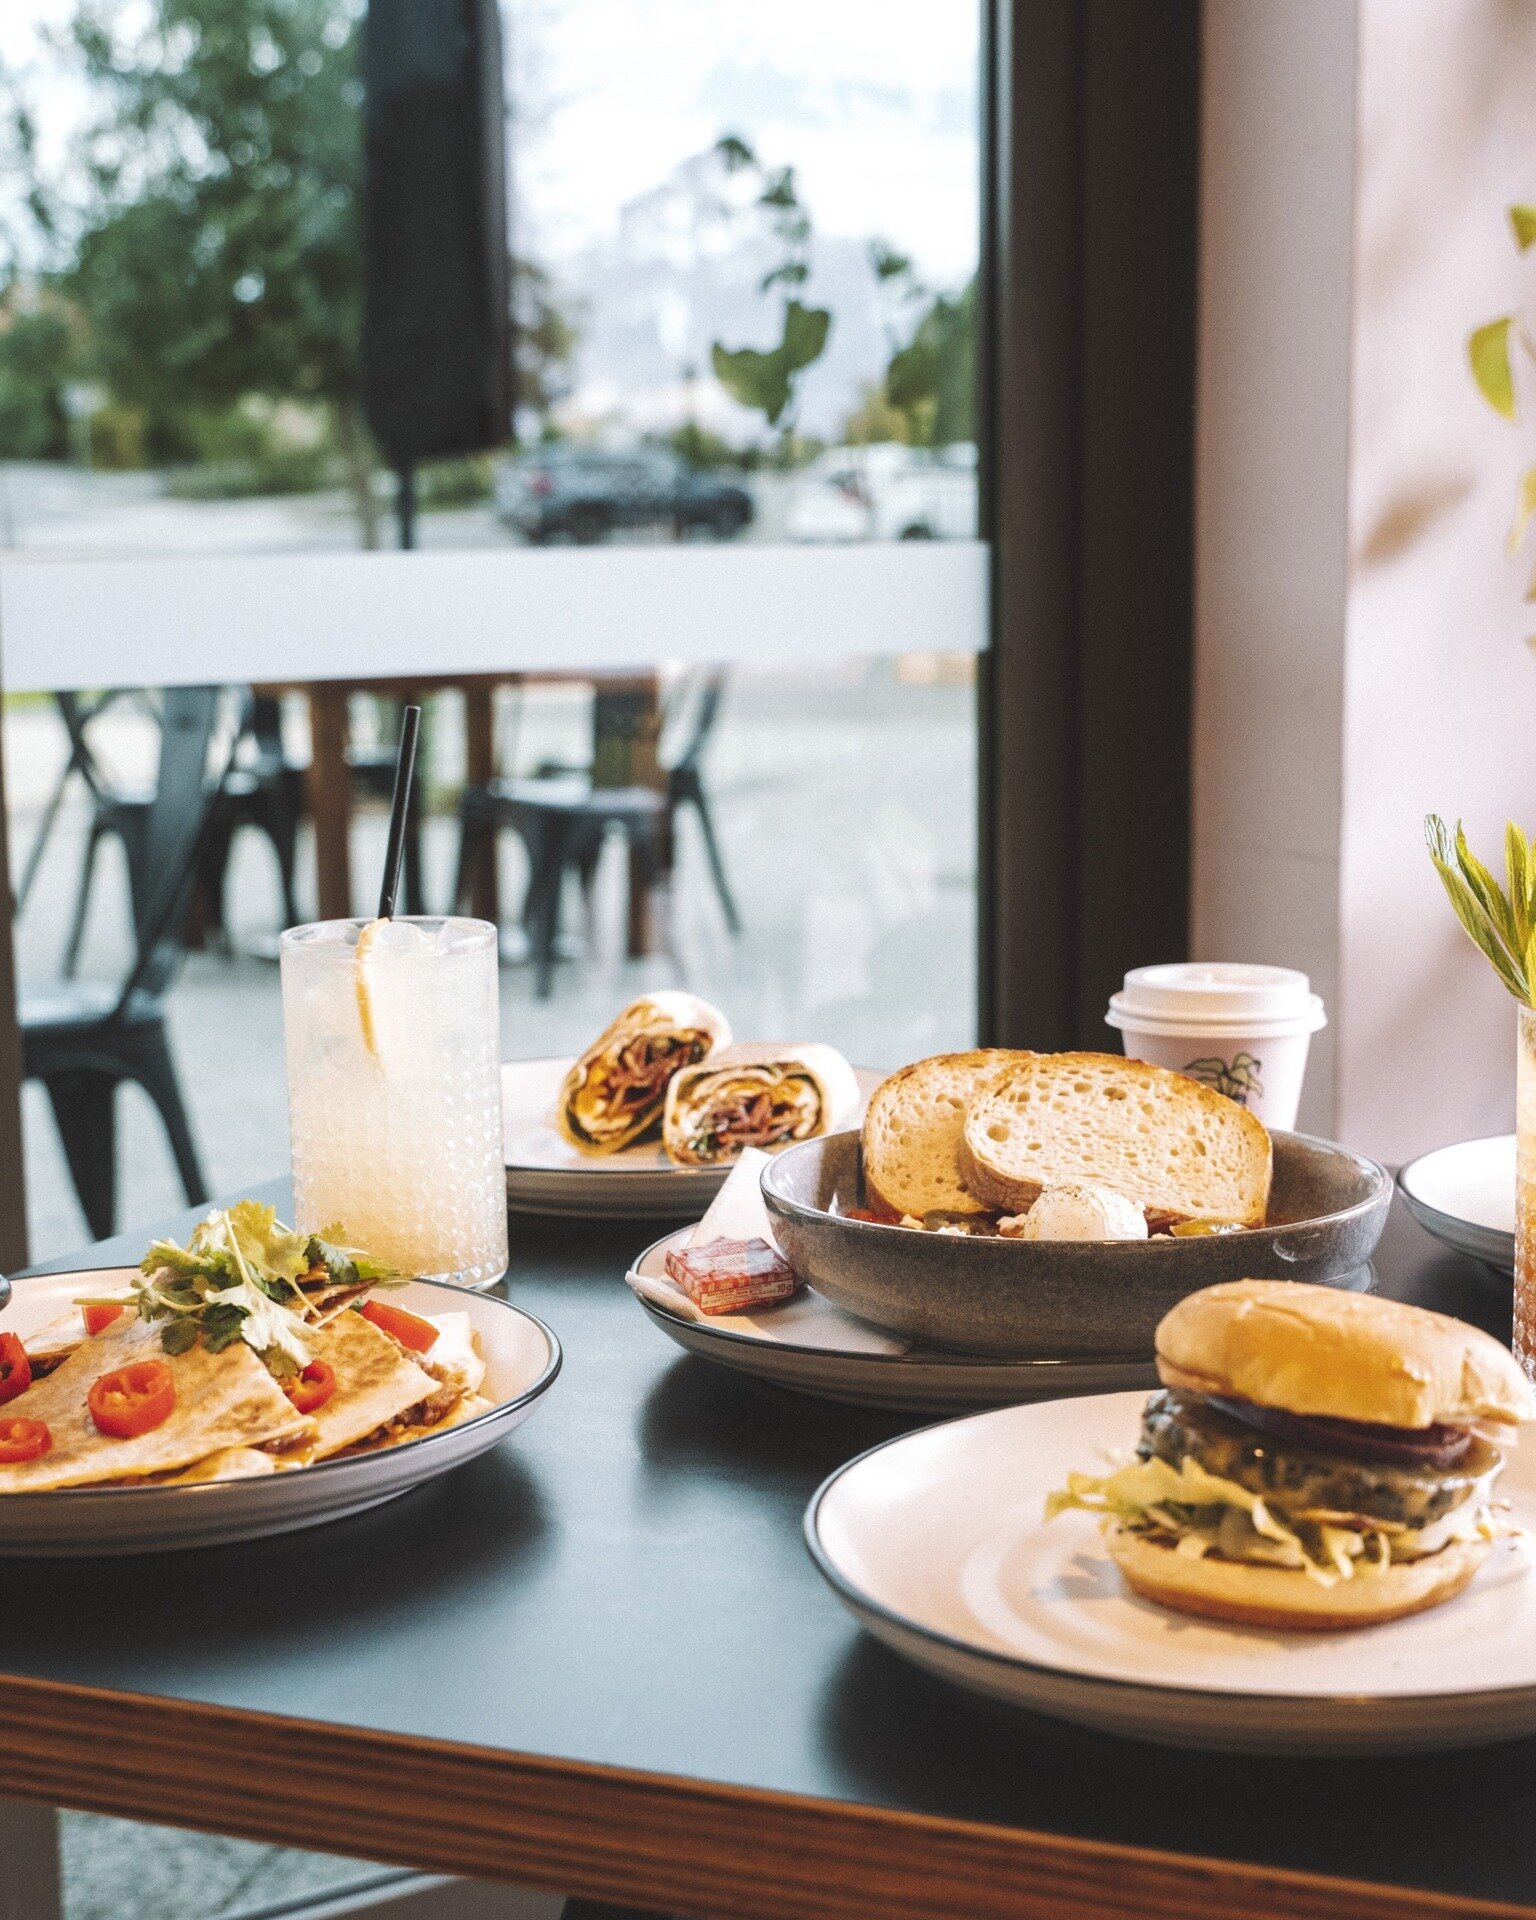 Brunchin&rsquo; with friends.  It&rsquo;s a vibe 😎 

Tag your brunch date below.

#perthfoodadventures #urbanlistperth #perthcafes #perthtakeaway #foodbloggerperth #perthyums #perthfood #pertheats #perthcakes #perthcoffee #perthdesserts #perthbites 